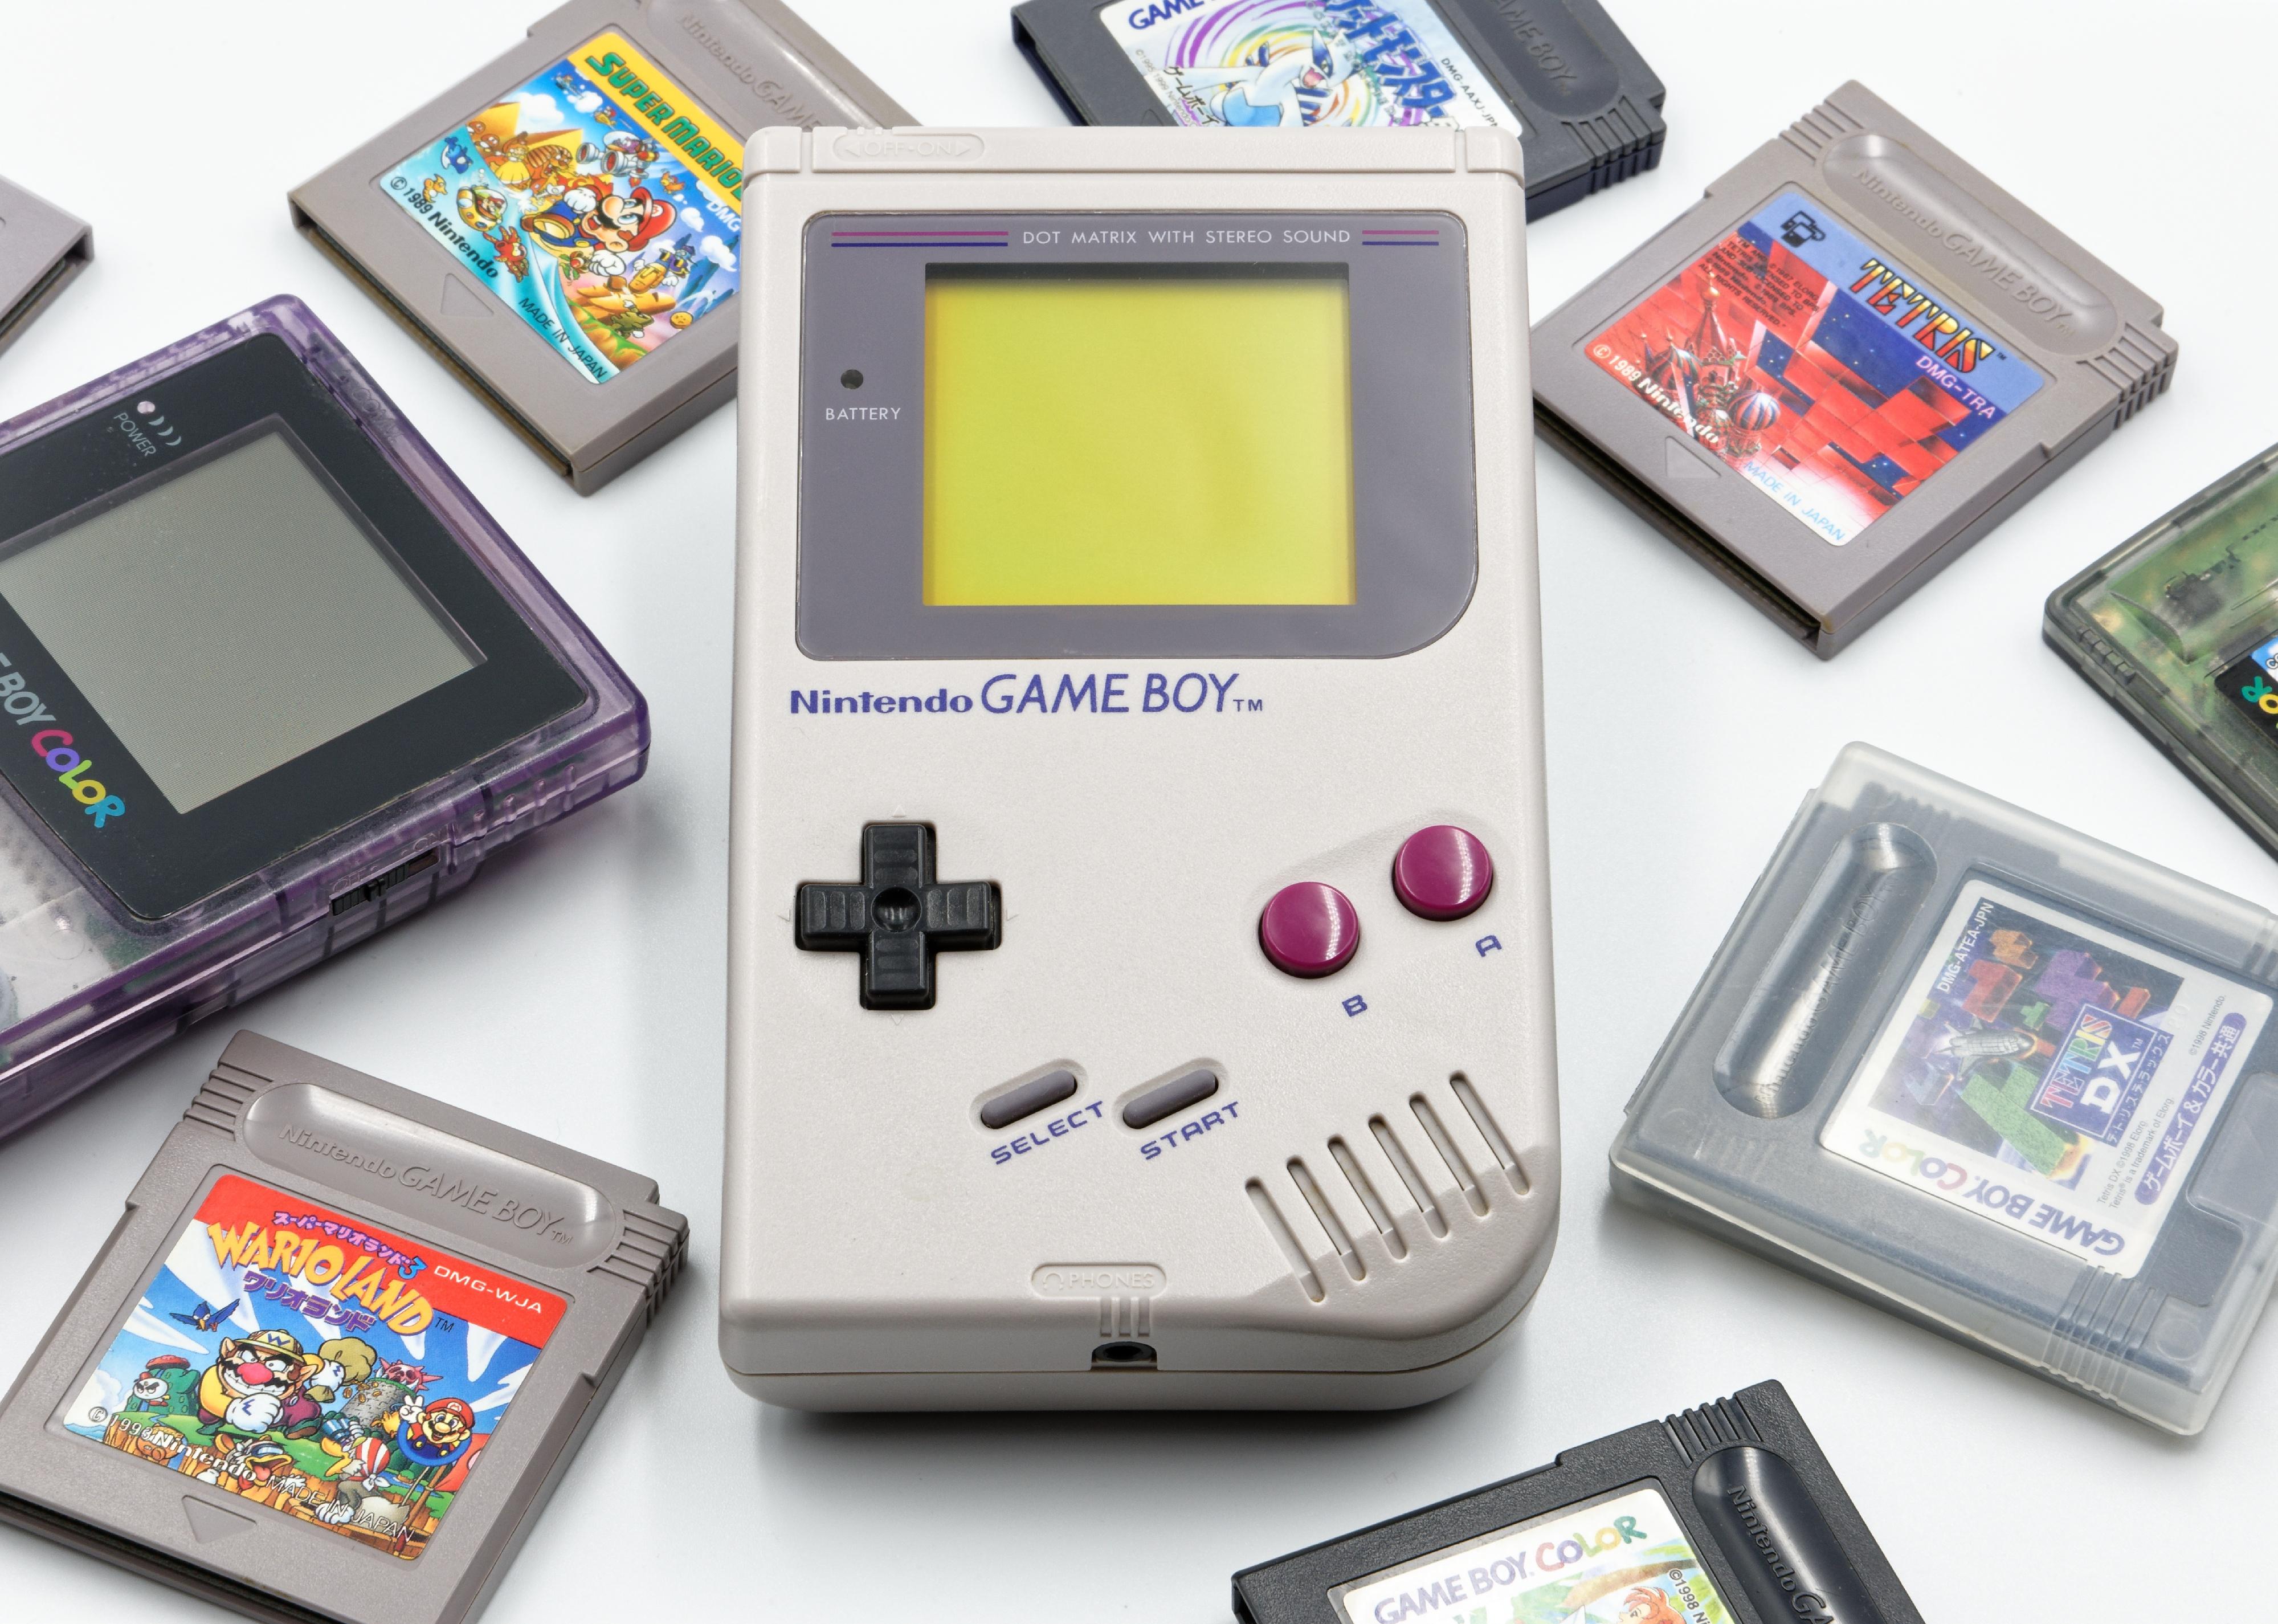 Nintendo Game Boy and several game cartridges on white background.